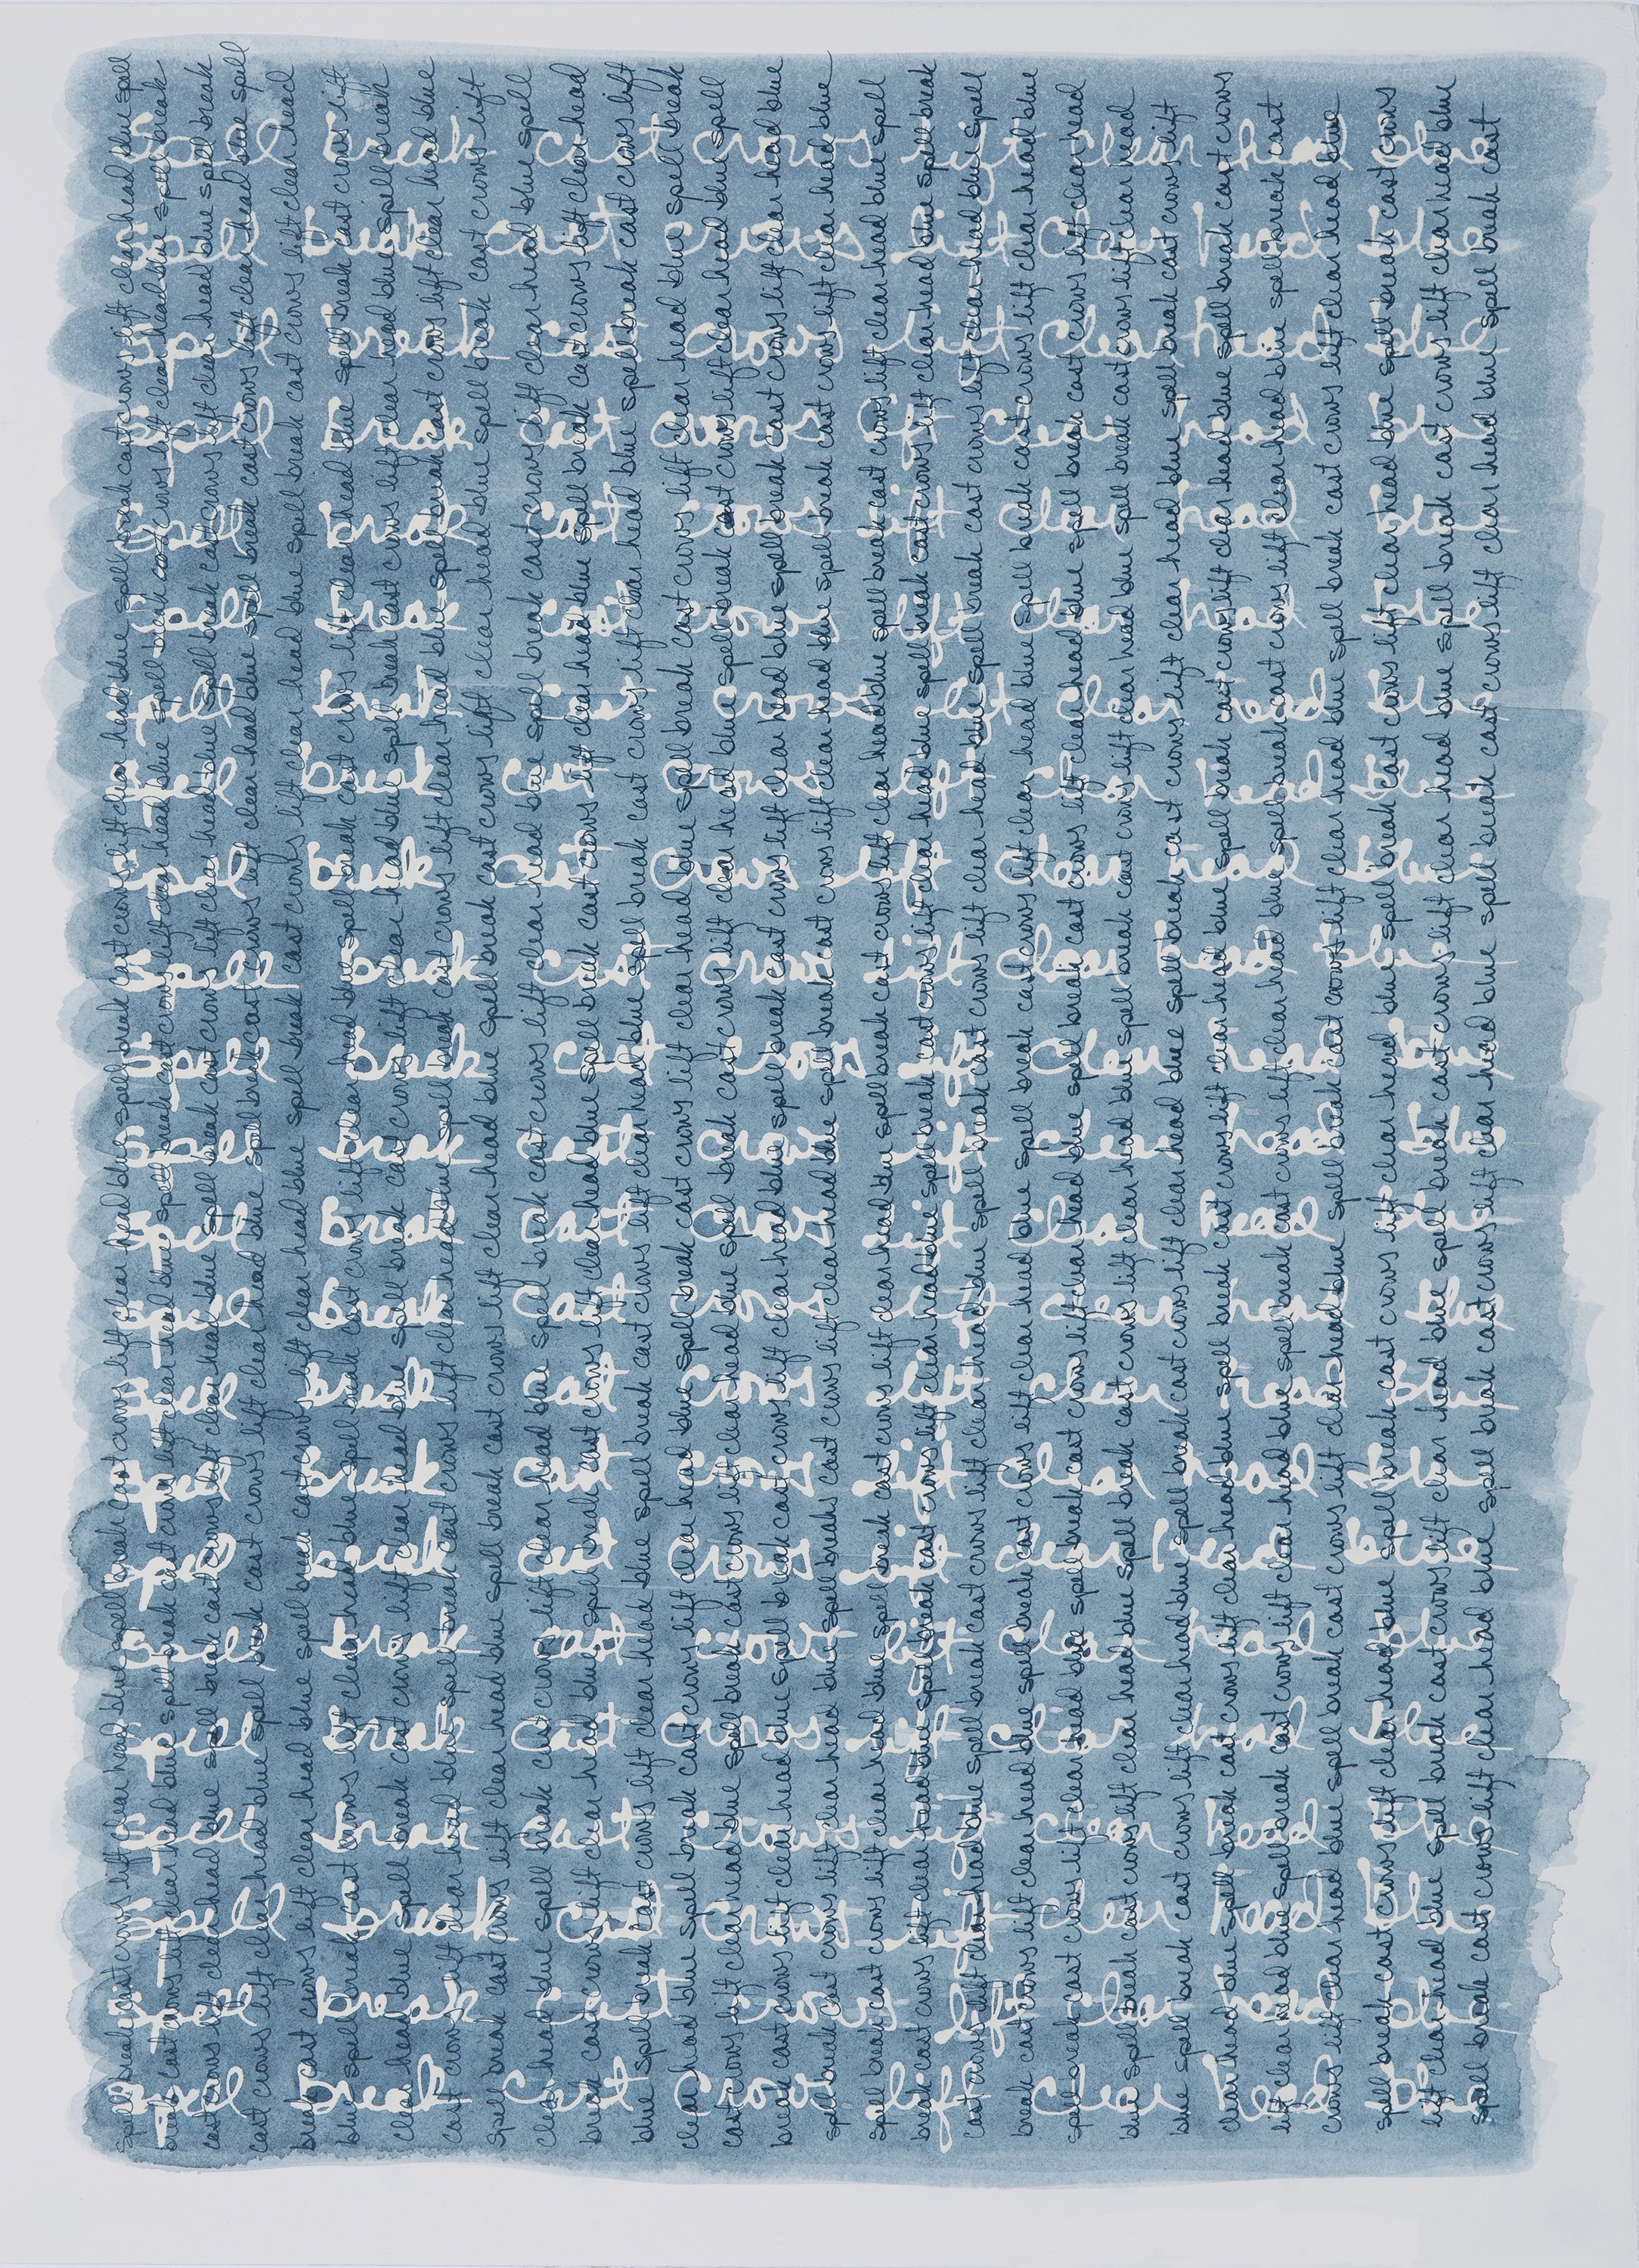 lift clear head blue, 2022 | watercolor, resist, ink & haiku on Fabriano paper | 20.5" x 14.5"